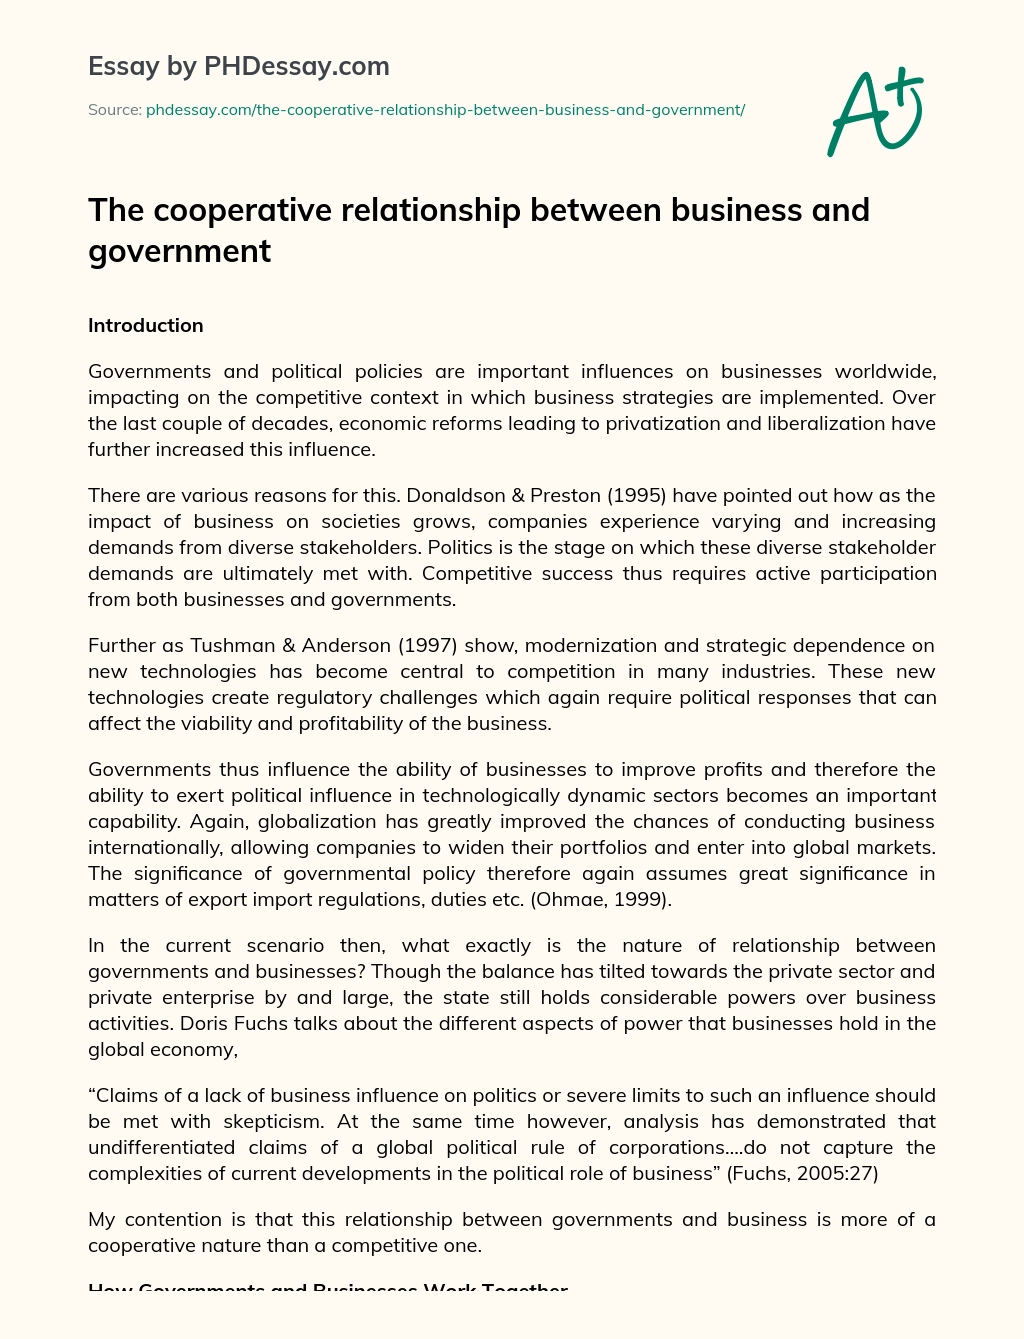 The cooperative relationship between business and government essay